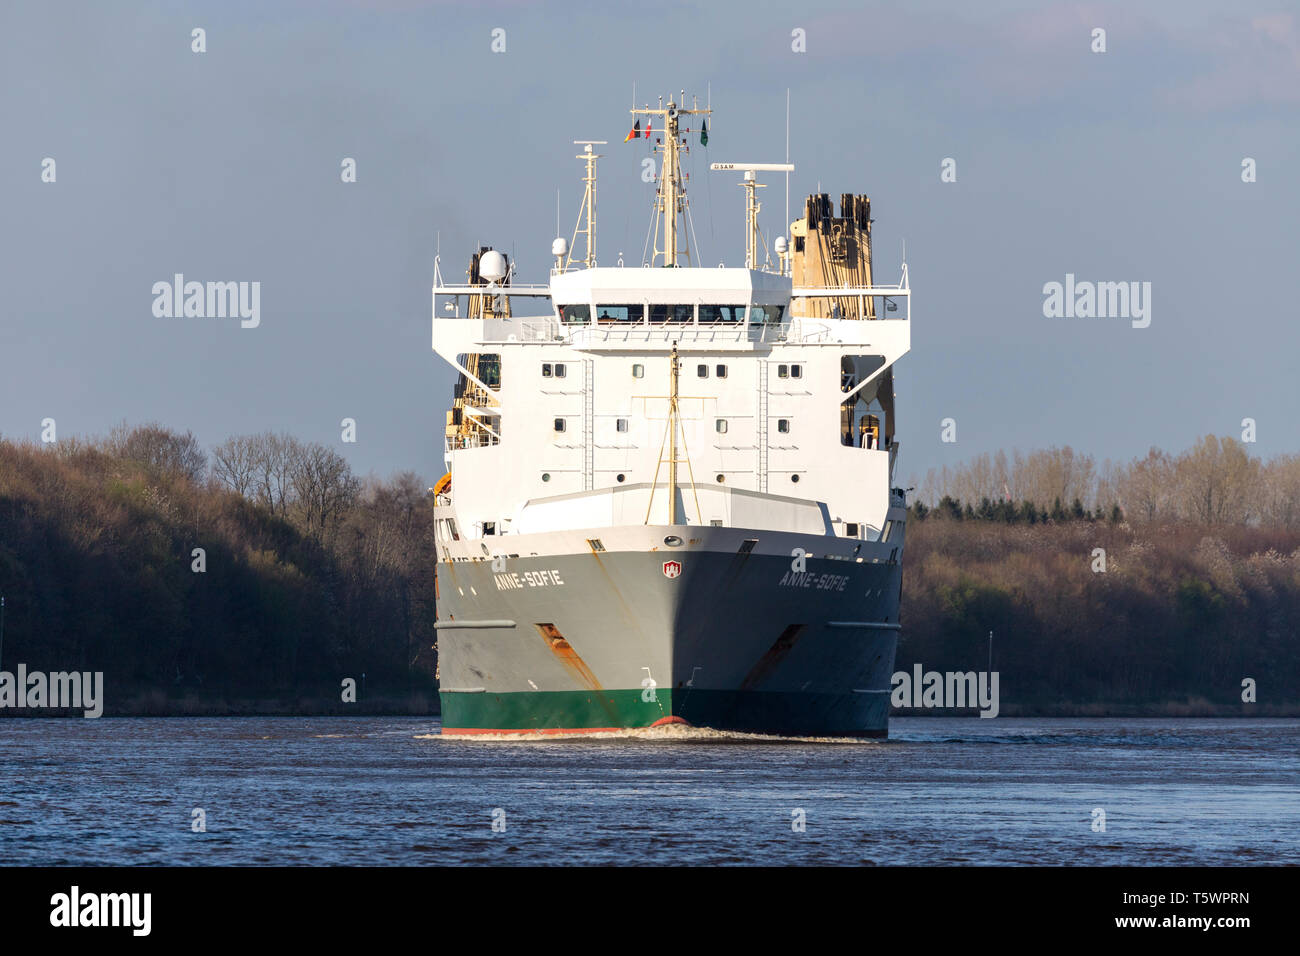 ANNE-SOFIE in the Kiel Canal. SAL Heavy Lift is one of the world’s leading carriers specialised in sea transport of heavy lift and project cargo. Stock Photo